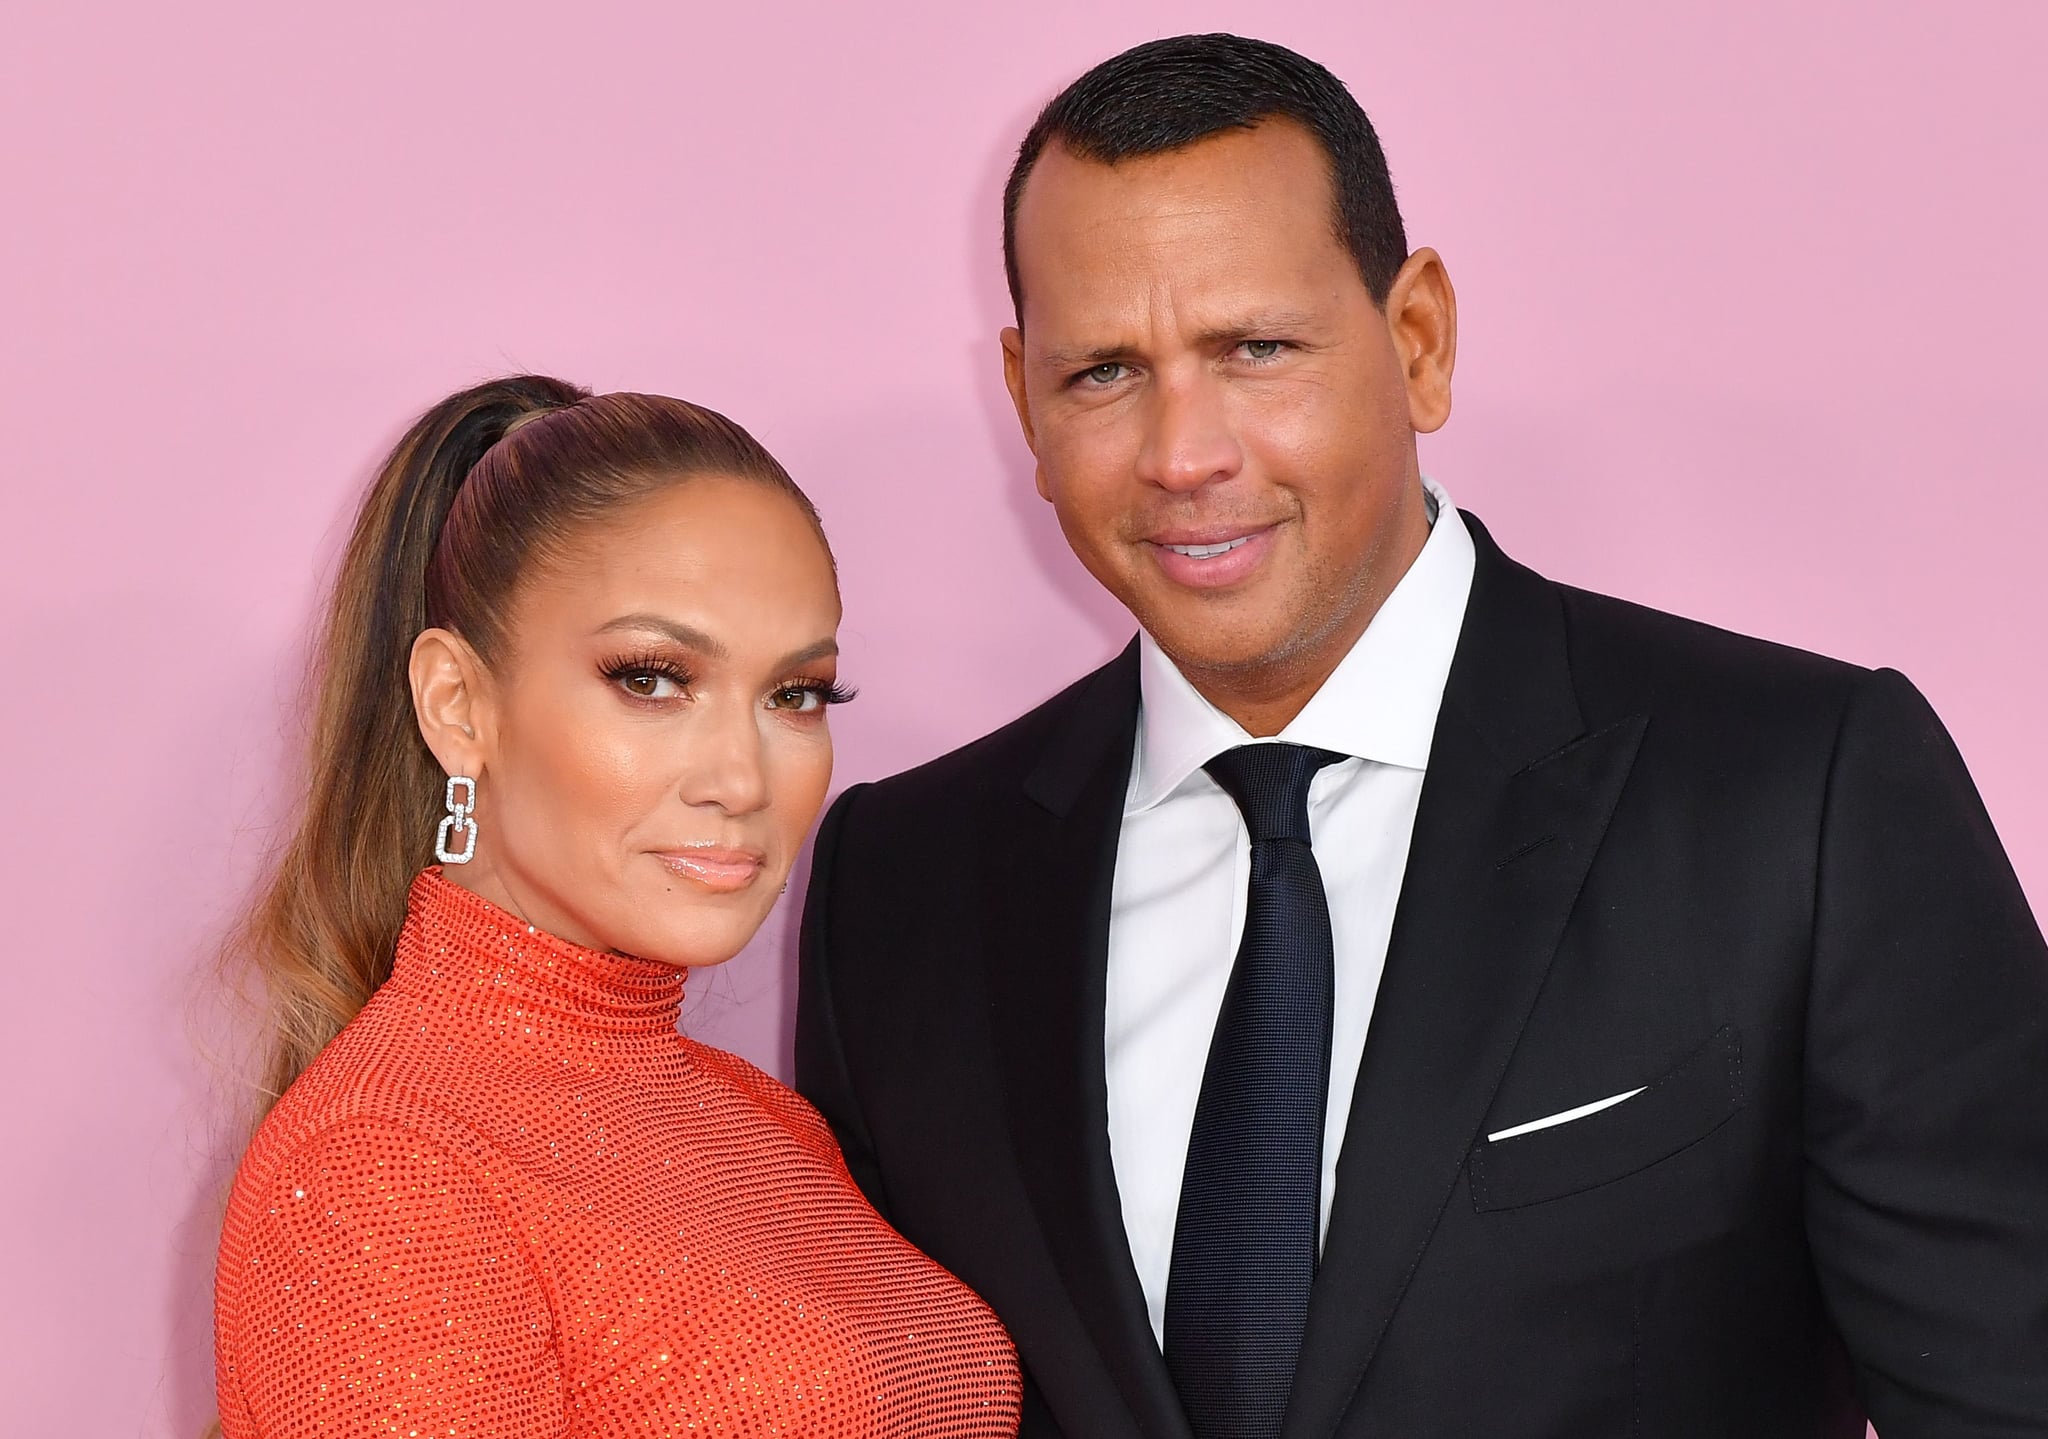 CFDA Fashion Icon Award recipient US singer Jennifer Lopez and fiance former baseball pro Alex Rodriguez arrive for the 2019 CFDA fashion awards at the Brooklyn Museum in New York City on June 3, 2019. (Photo by ANGELA WEISS / AFP)        (Photo credit should read ANGELA WEISS/AFP via Getty Images)